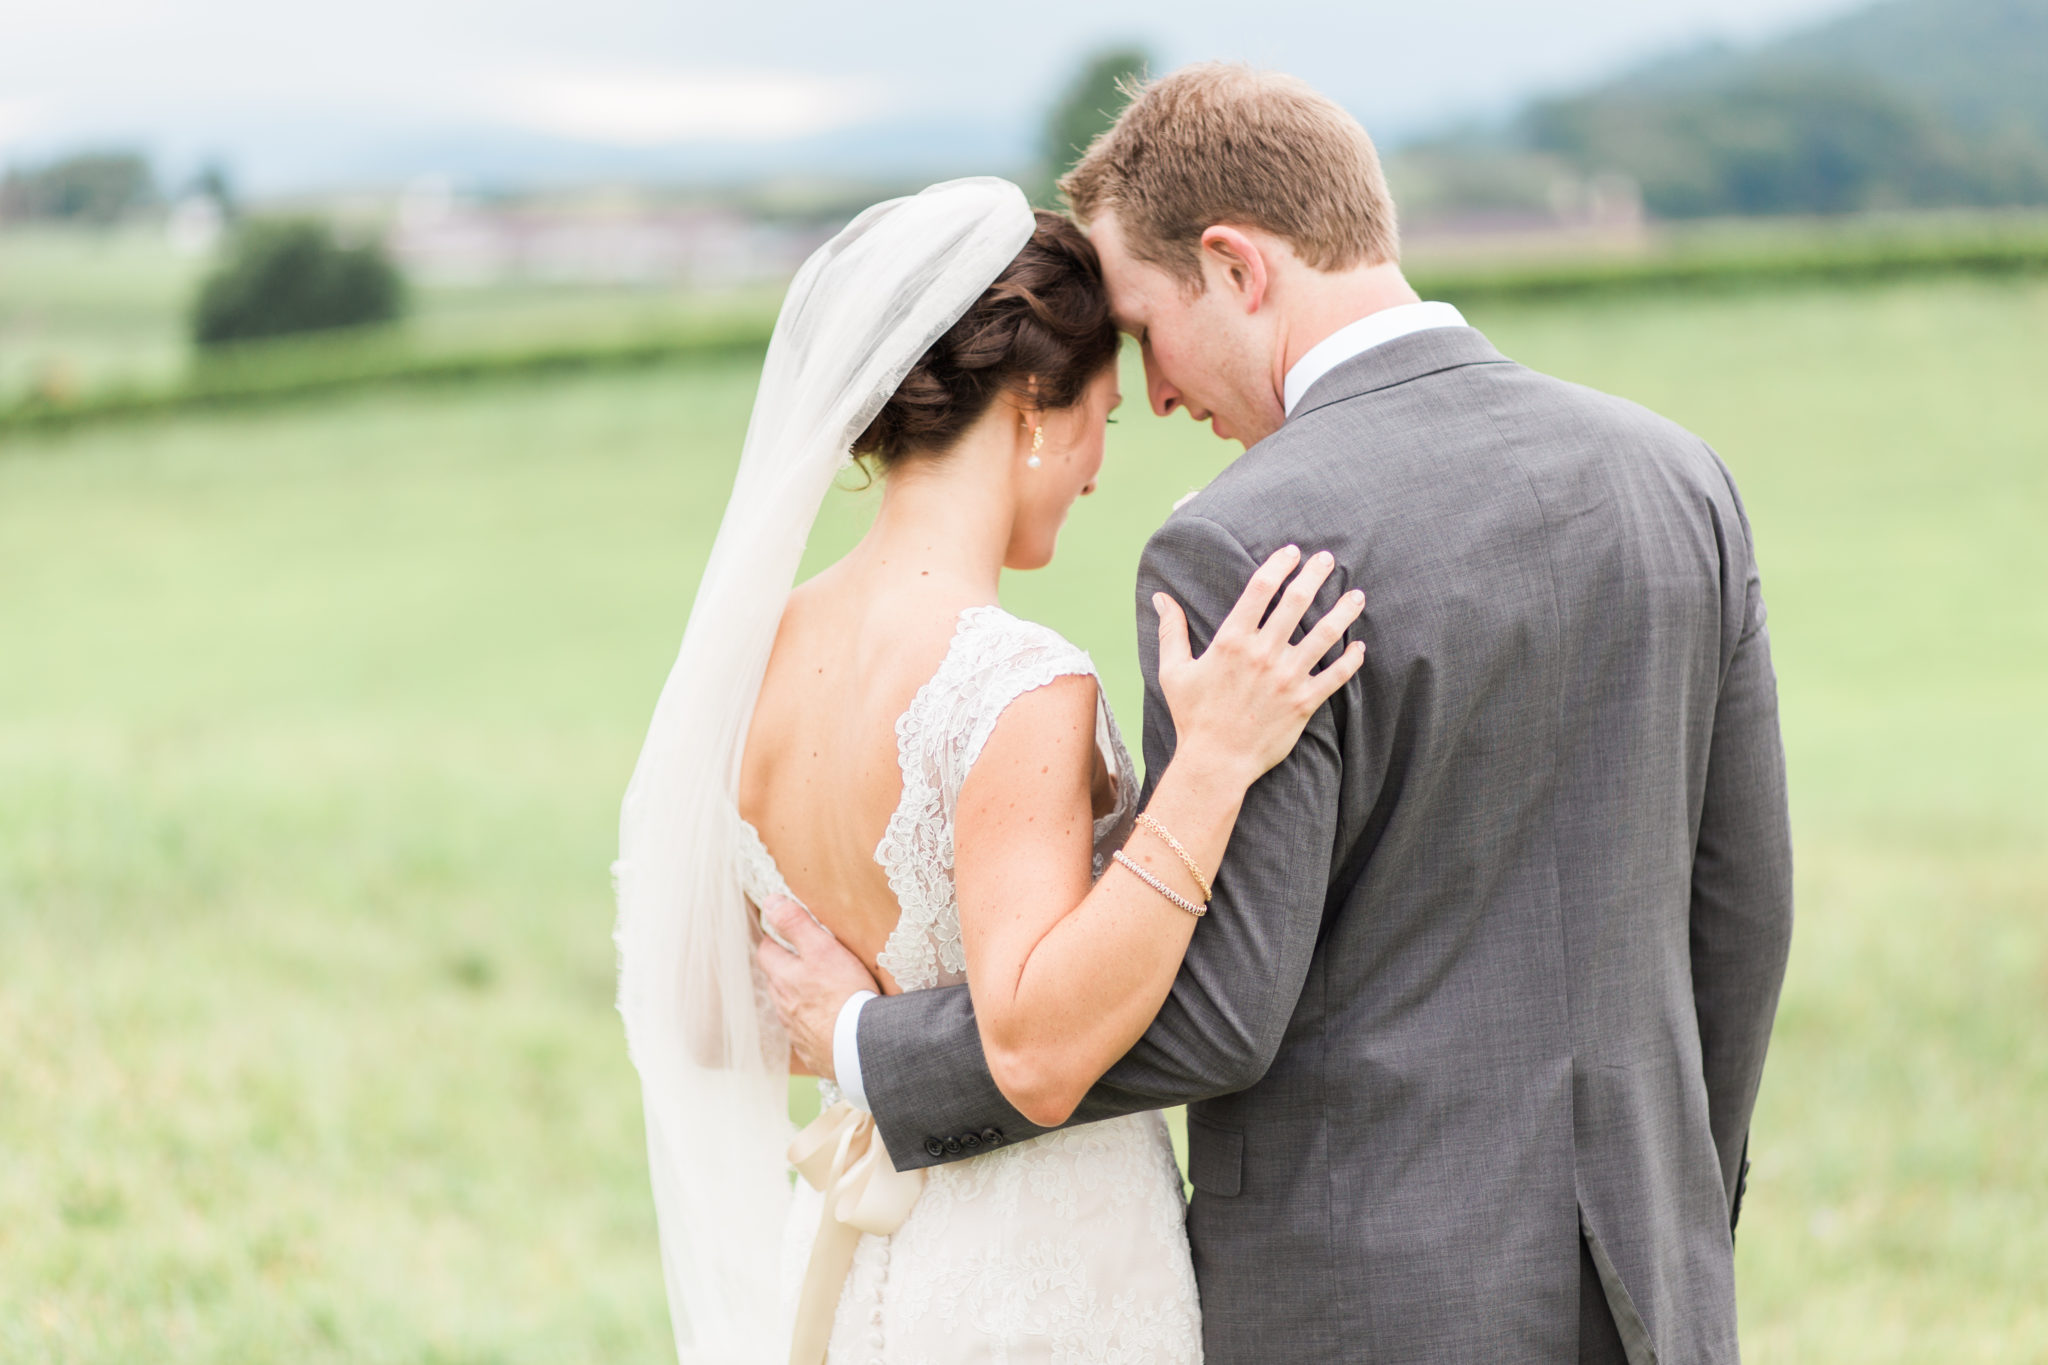 The best images of 2014 by Washington, DC wedding photographer, Alicia Lacey.